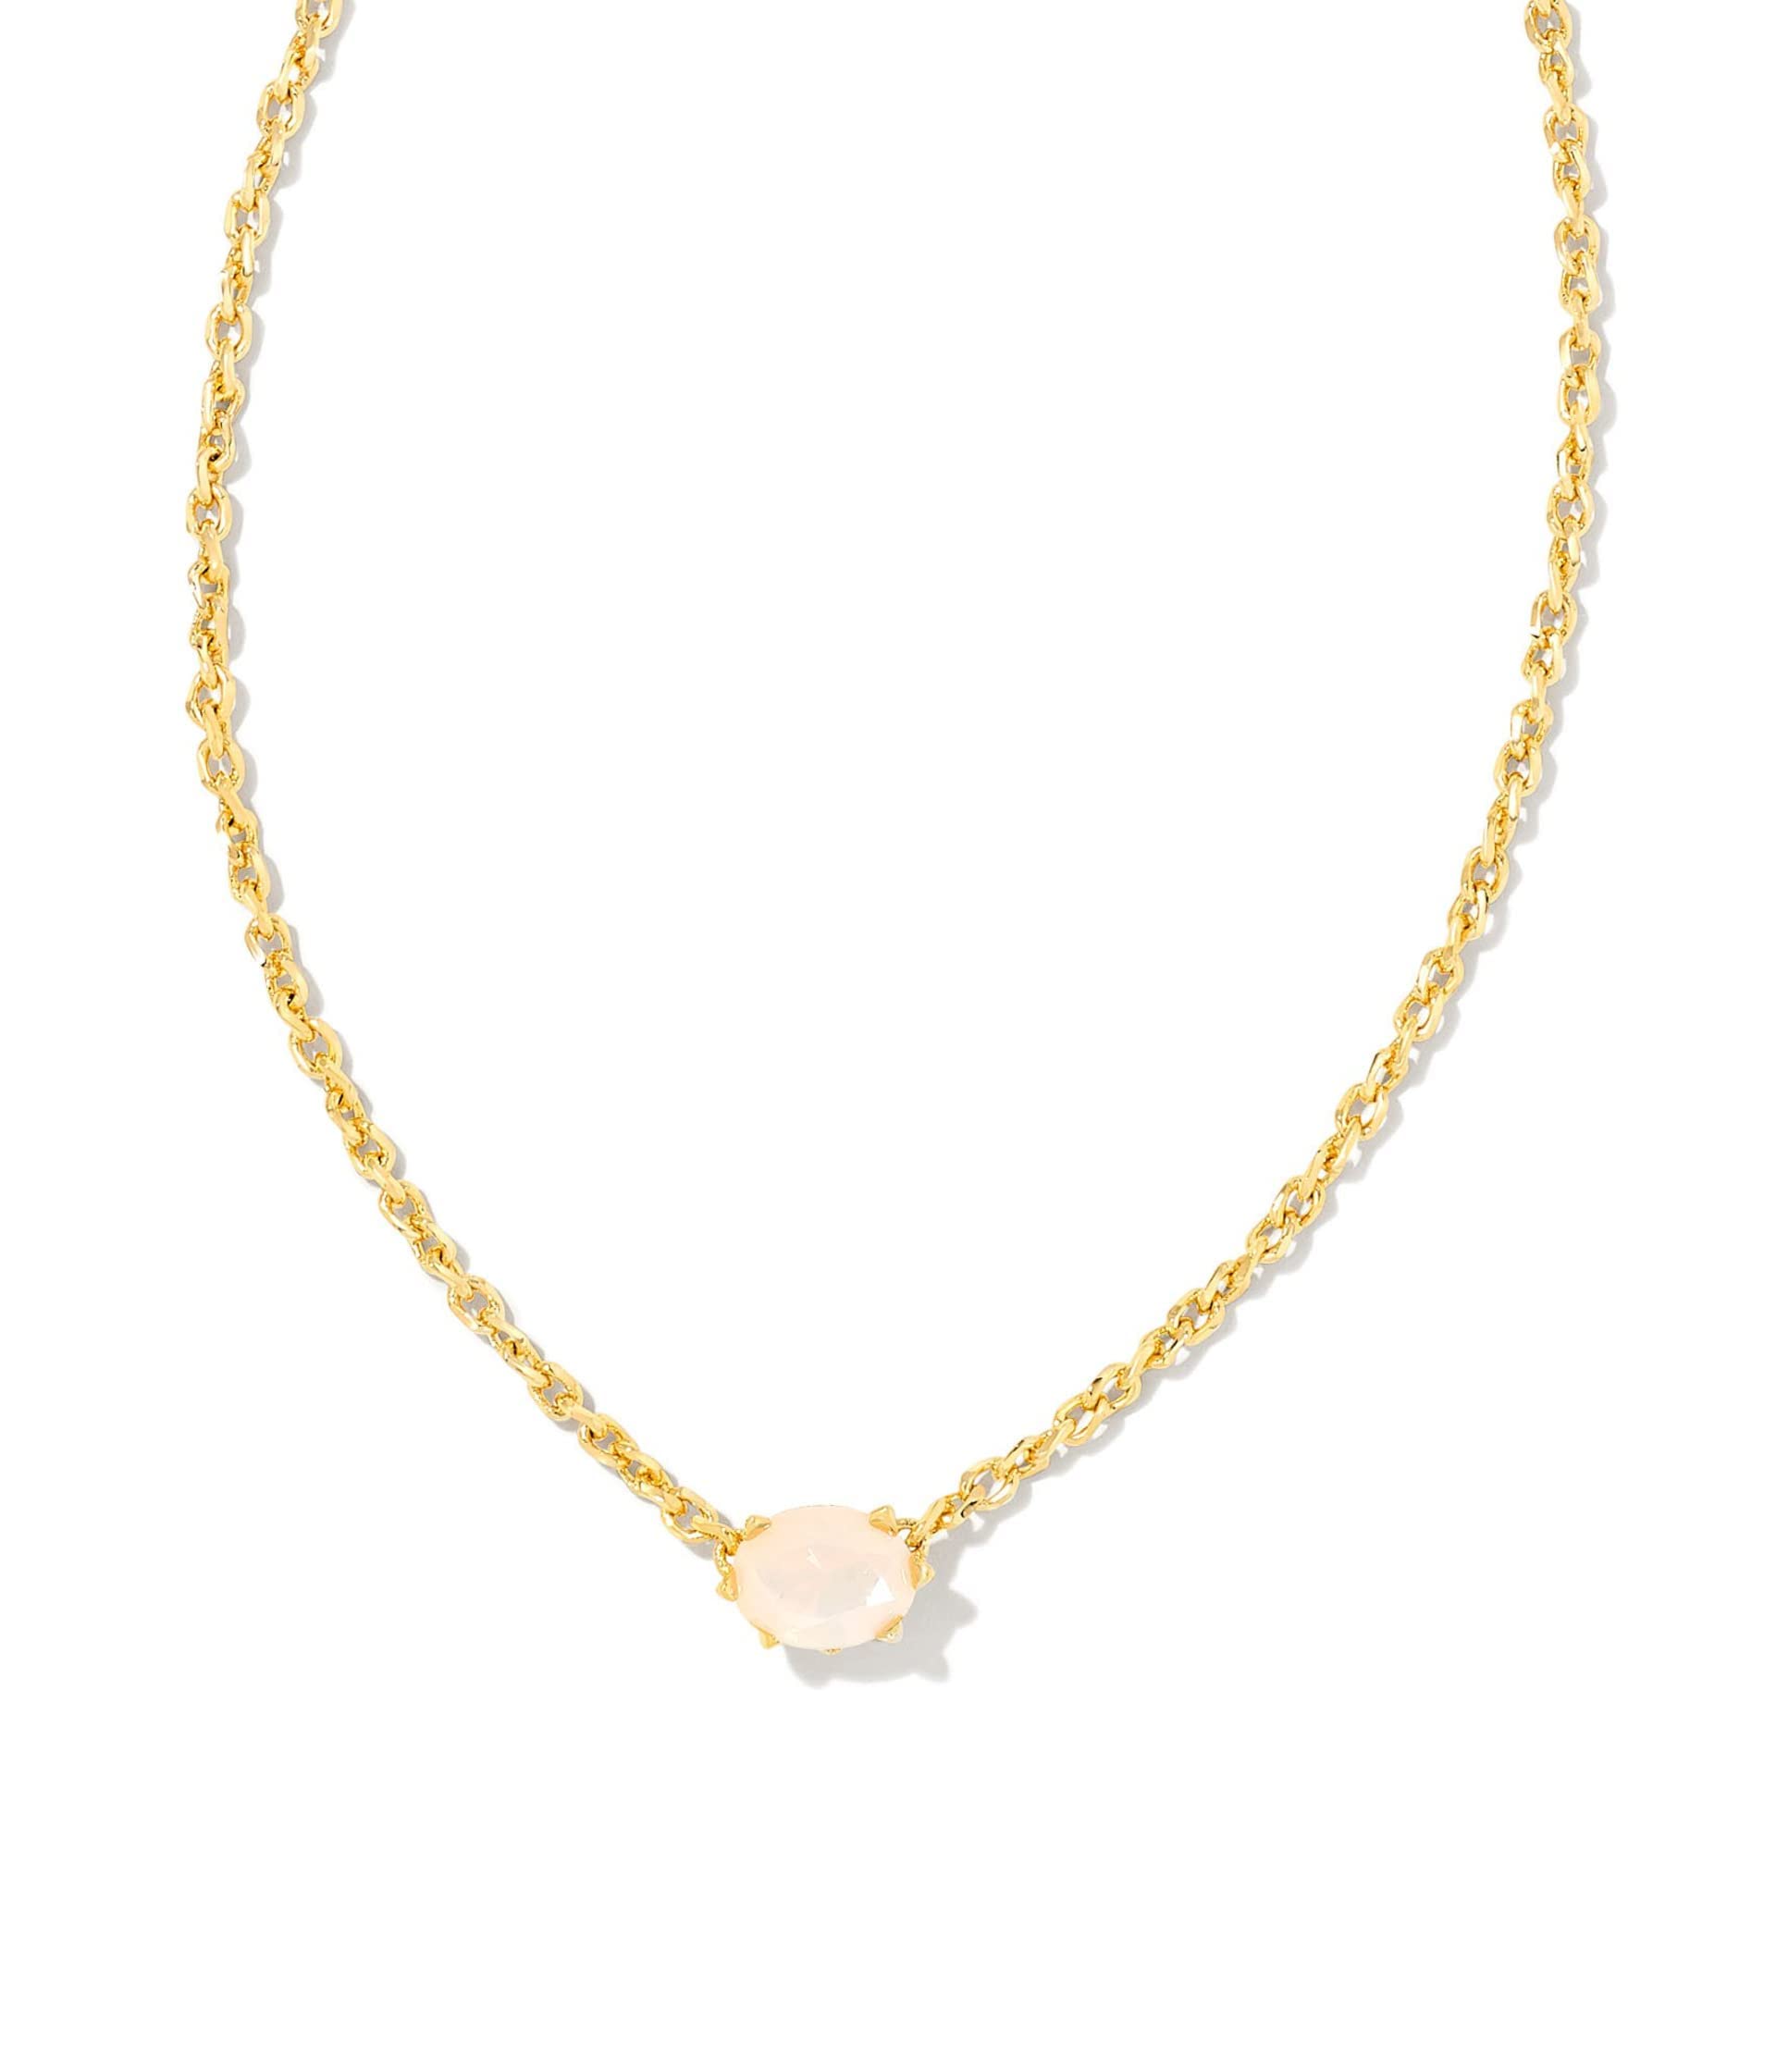 Kendra Scott Cailin Pendant Necklace Gold Champagne Opal Crystal One Size